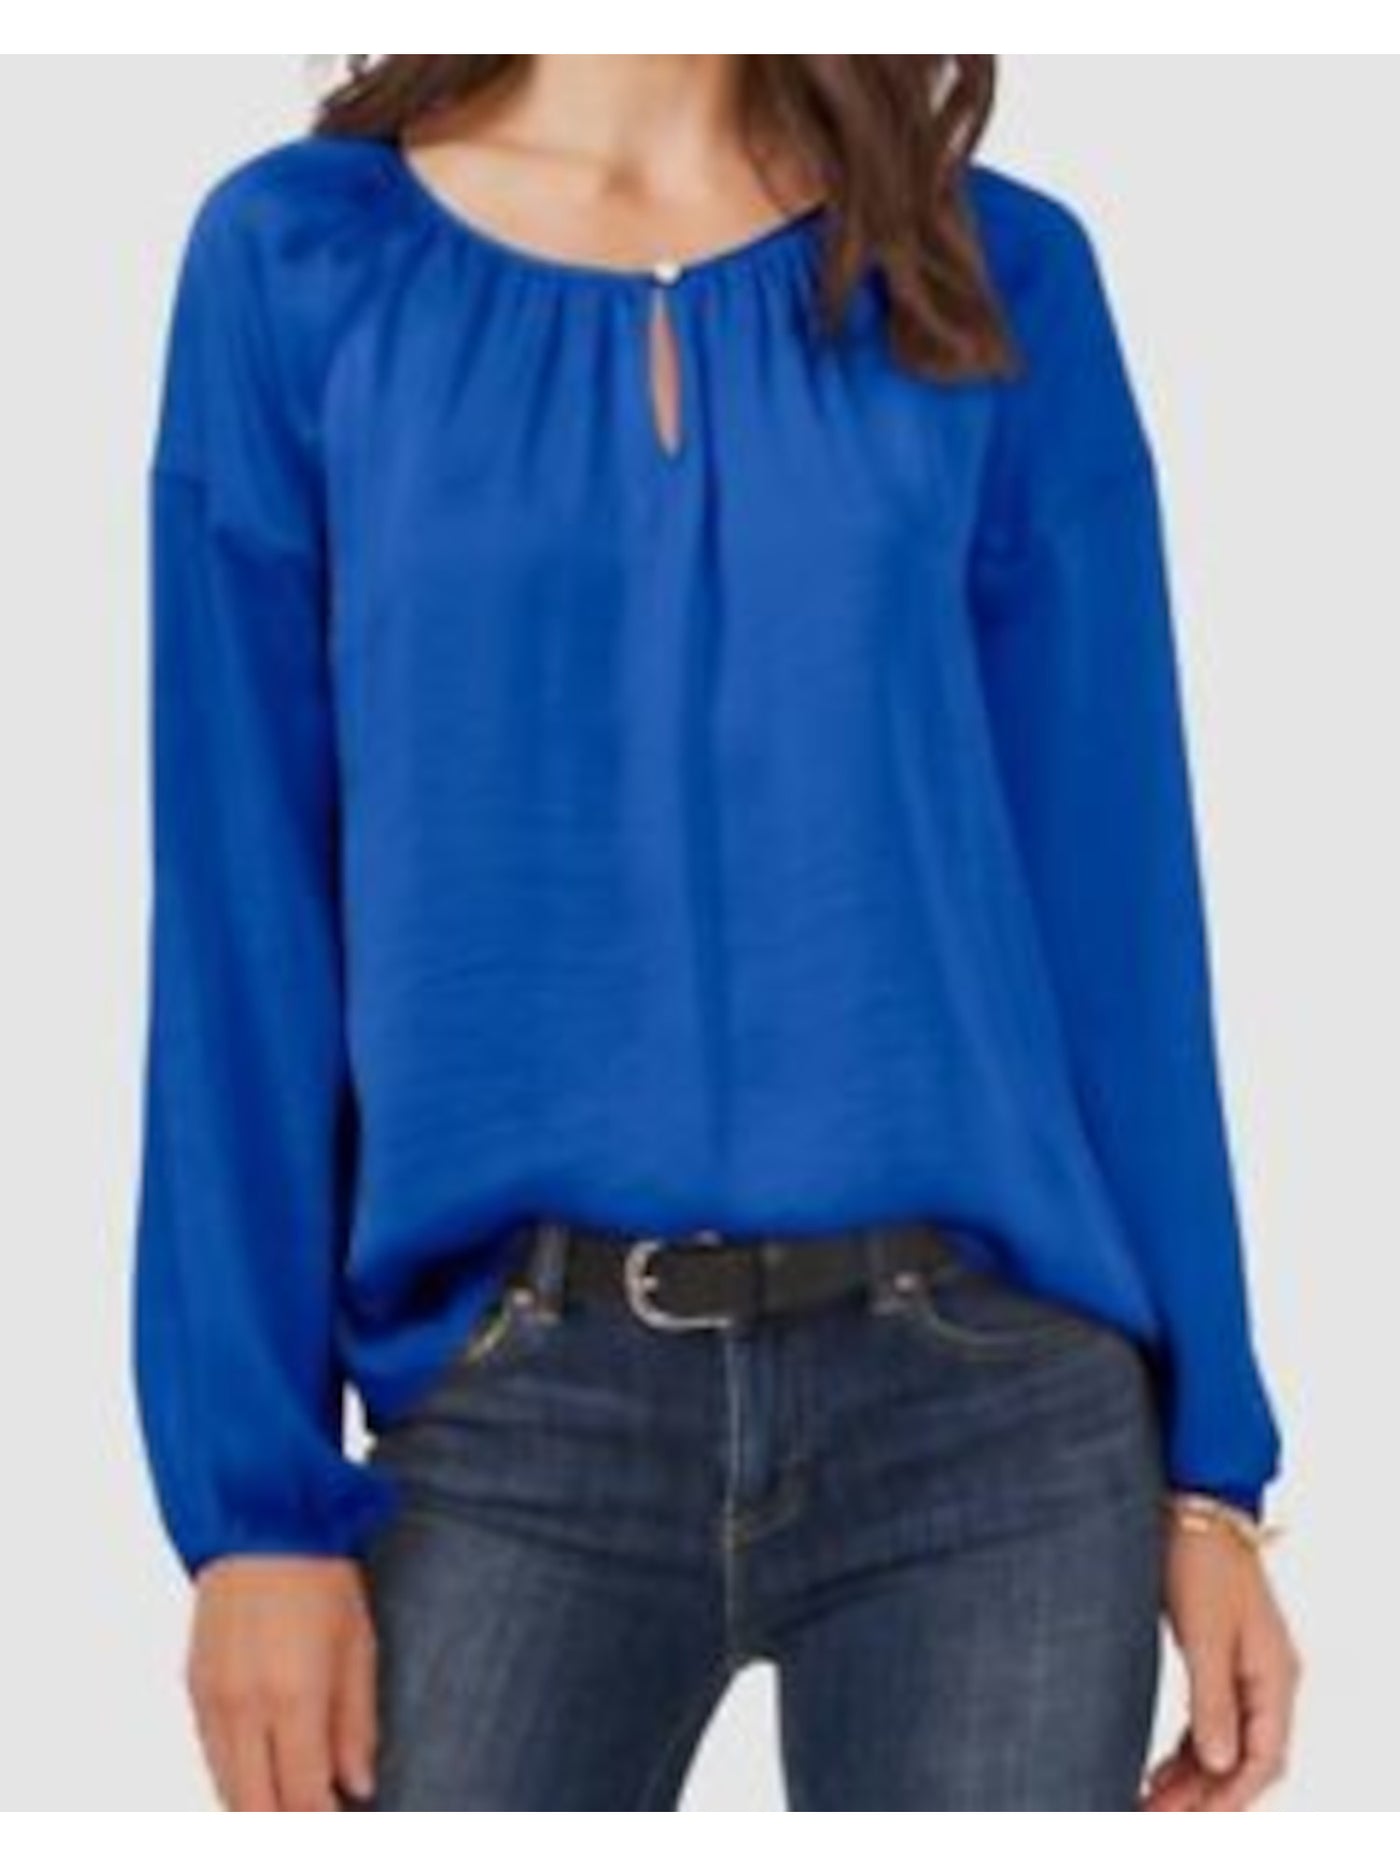 VINCE CAMUTO Womens Blue Gathered Curved Hem Long Sleeve Keyhole Wear To Work Peasant Top S